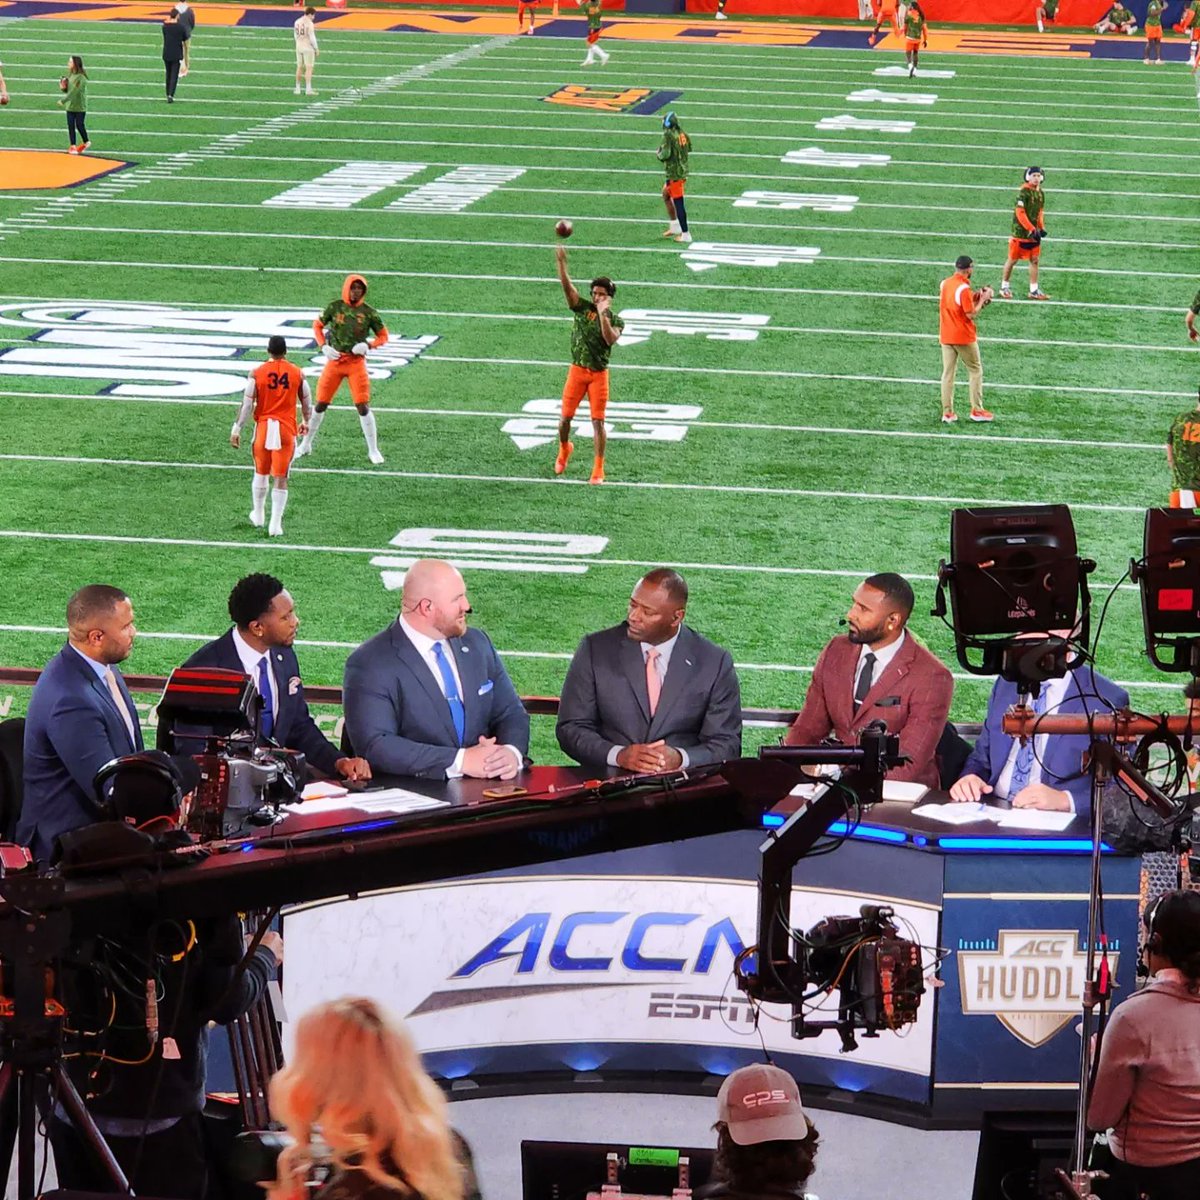 My view from Club 44 at the @JMAWirelessDome pregame. Getting to watch the big guys from @accnetwork #goorange #beatfsu